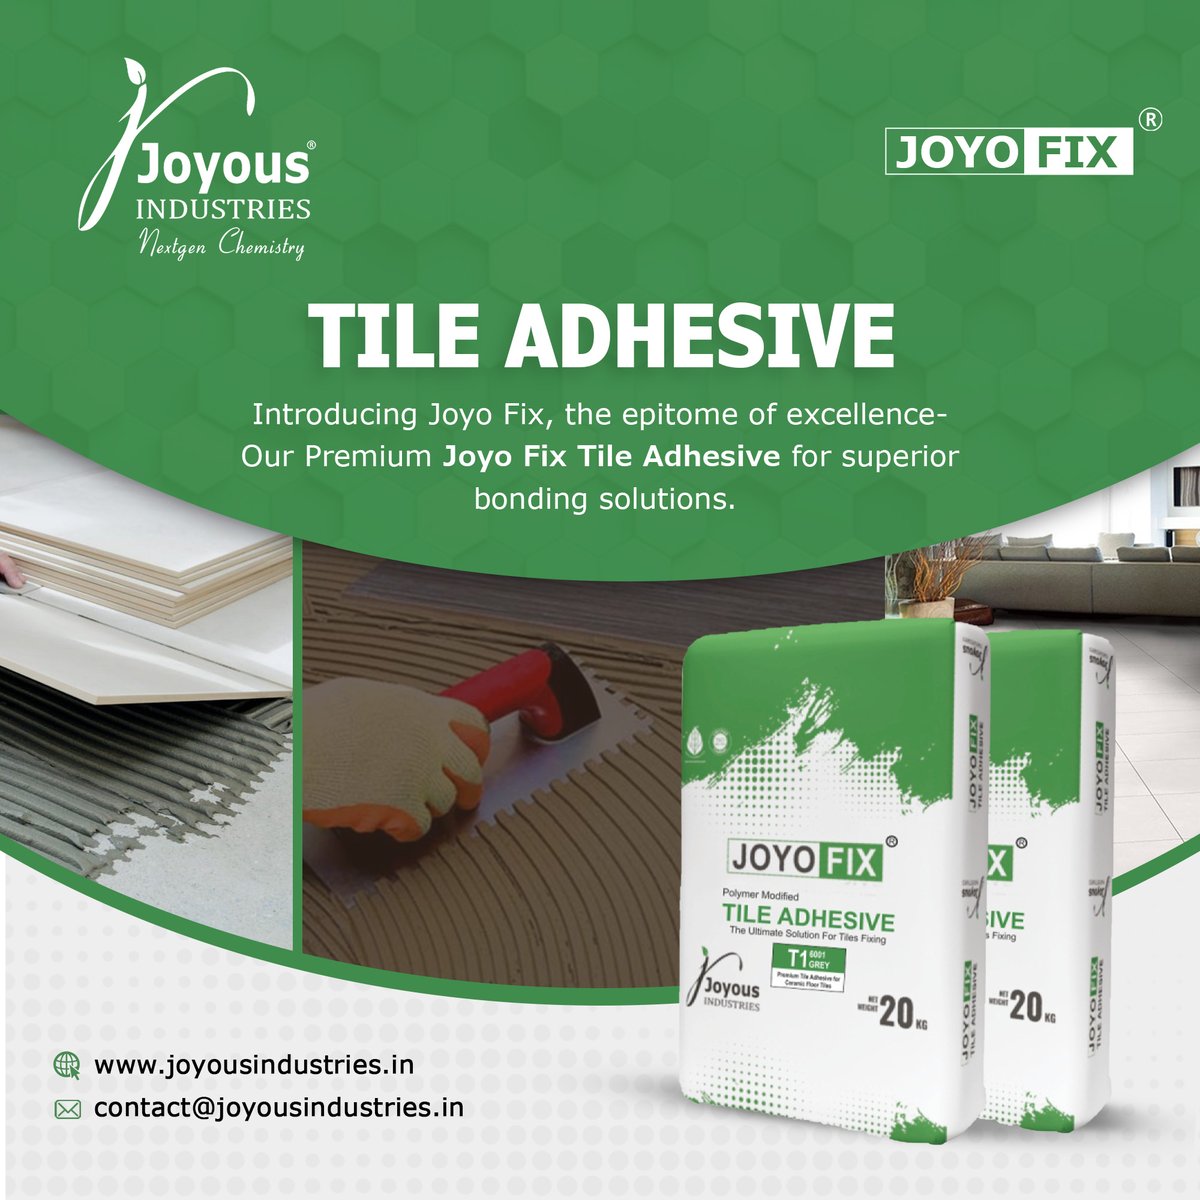 Unleash the Power of Perfection: Introducing Joyo Fix, the Ultimate Tile Adhesive for Superior Bonding Solutions.

@joyousindustries #Joyousindustries #Joyous #joyoshield #joyofix #tileadhesive #construction #stoneadhesive #adhesive #wallprimer #concretemixture #stoneprimer